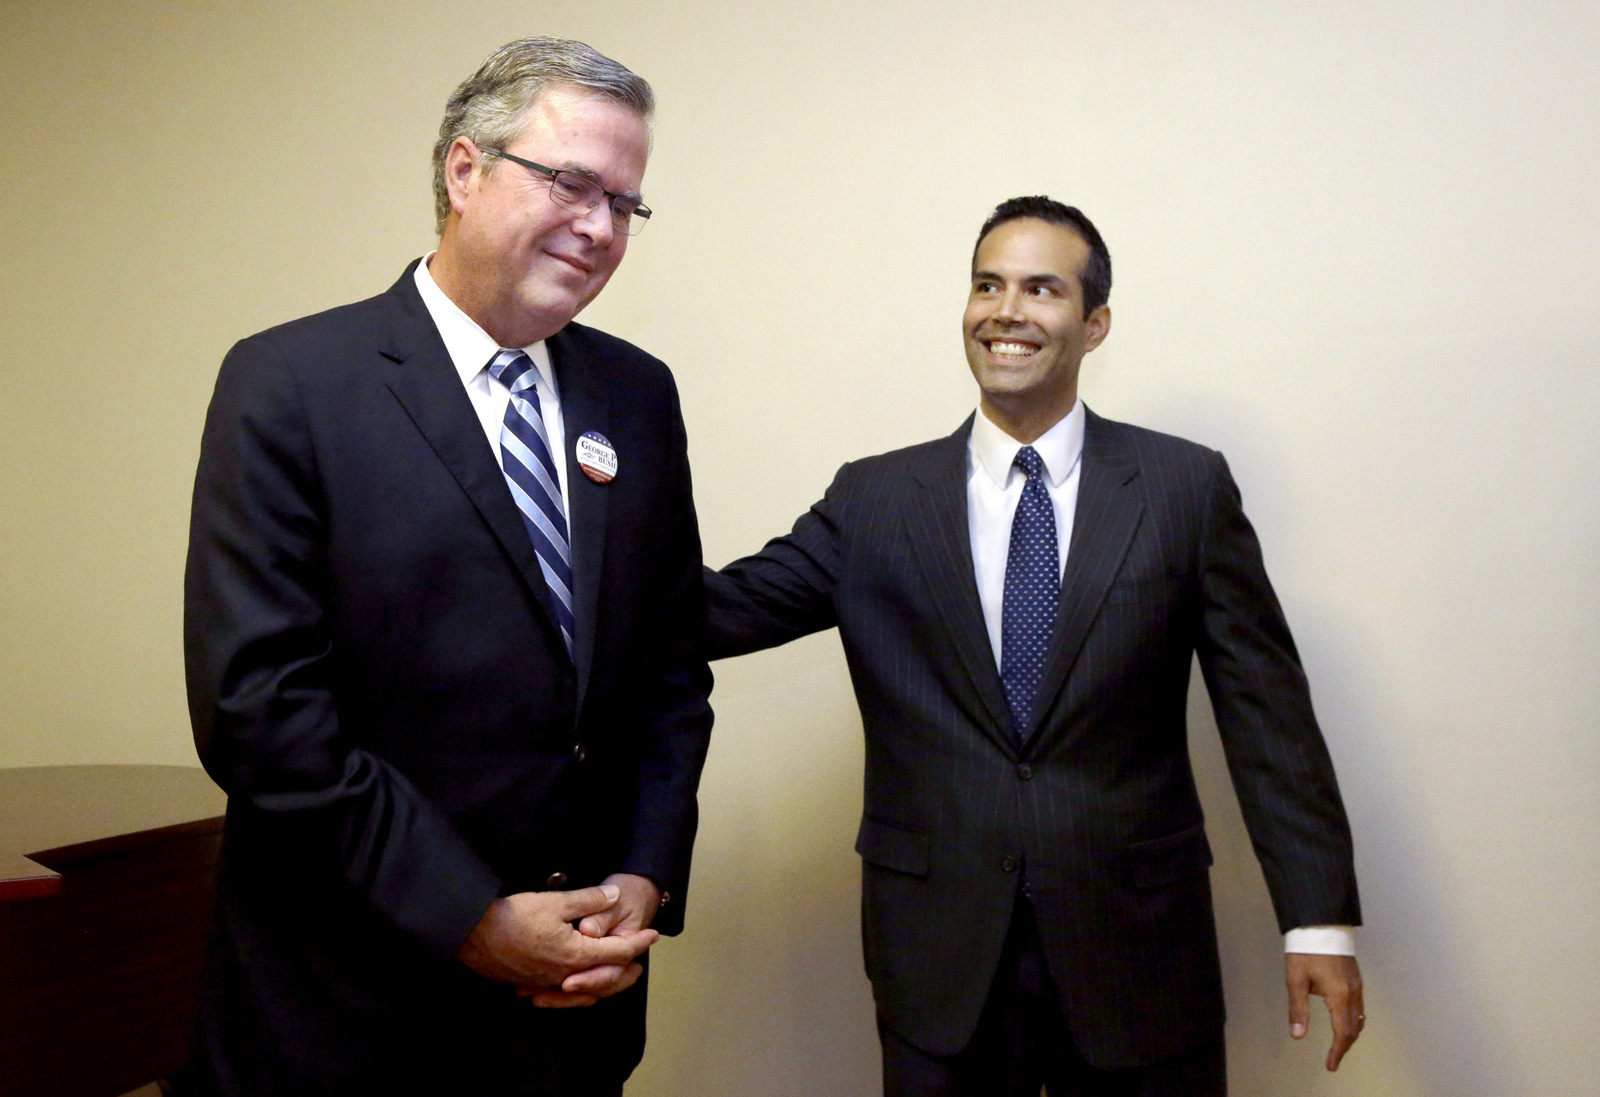 File - In this Oct. 4, 2014 file photo, George P. Bush, right, reaches to his father, former Florida Gov. Jeb Bush after the senior Bush became emotional when expressing his pride for his son while speaking to supporters at Hardin-Simmons University, in Abilene, Texas. George P. Bush has been helping members of his famous family get elected since age 3 but has never played a larger role as a political surrogate than this cycle, as he tries to help his dad follow his grandfather, George H.W. Bush, and his uncle, George W. Bush, to the White House. (AP Photo/LM Otero, File)